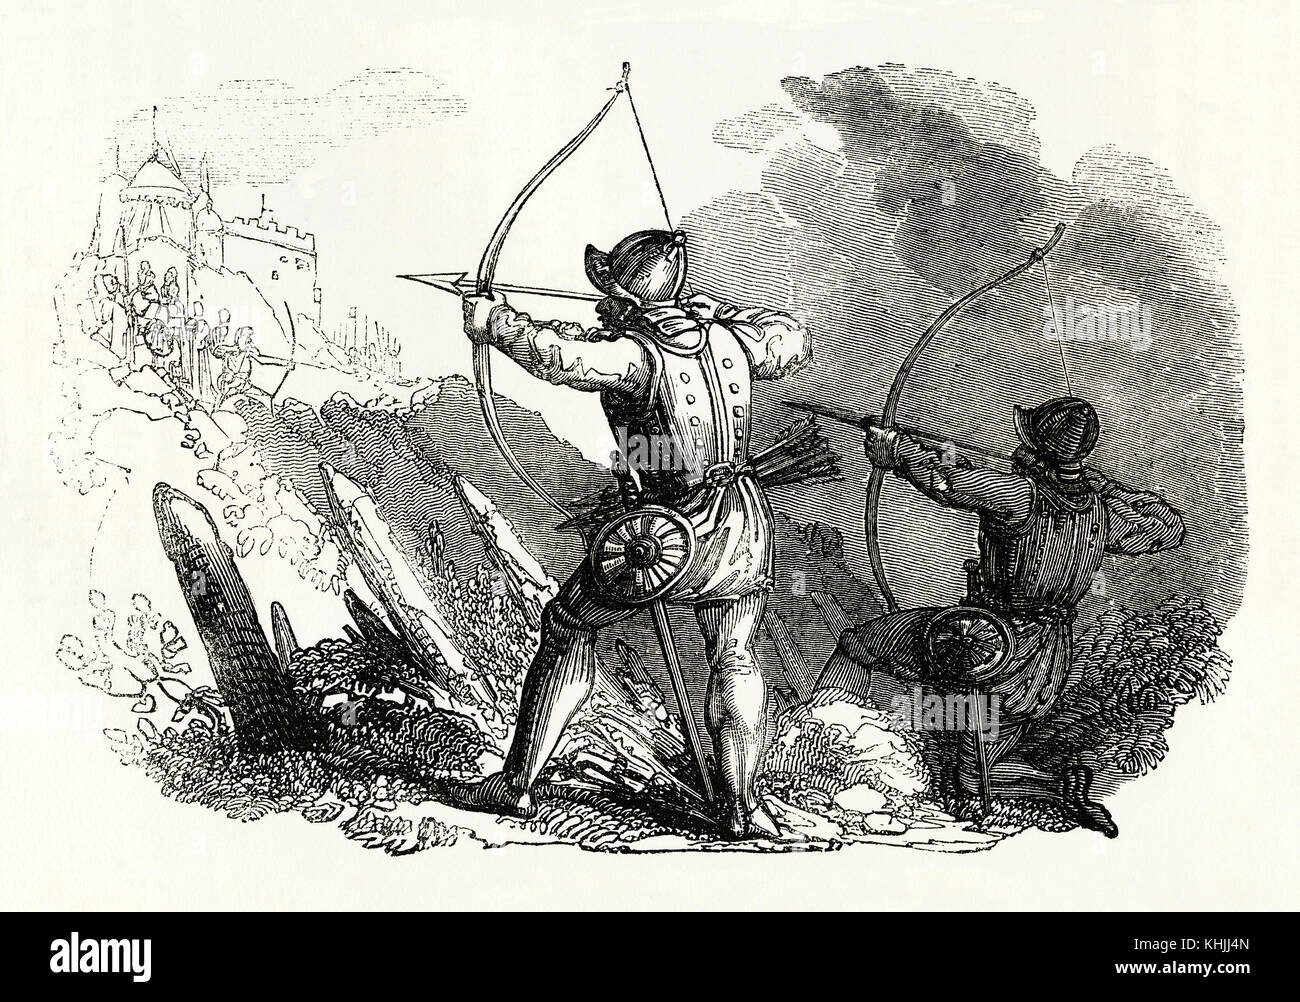 An old engraving depicting archers using longbows in medieval times. In the Middle Ages the Welsh and English were famous for their very powerful longbows. Stock Photo